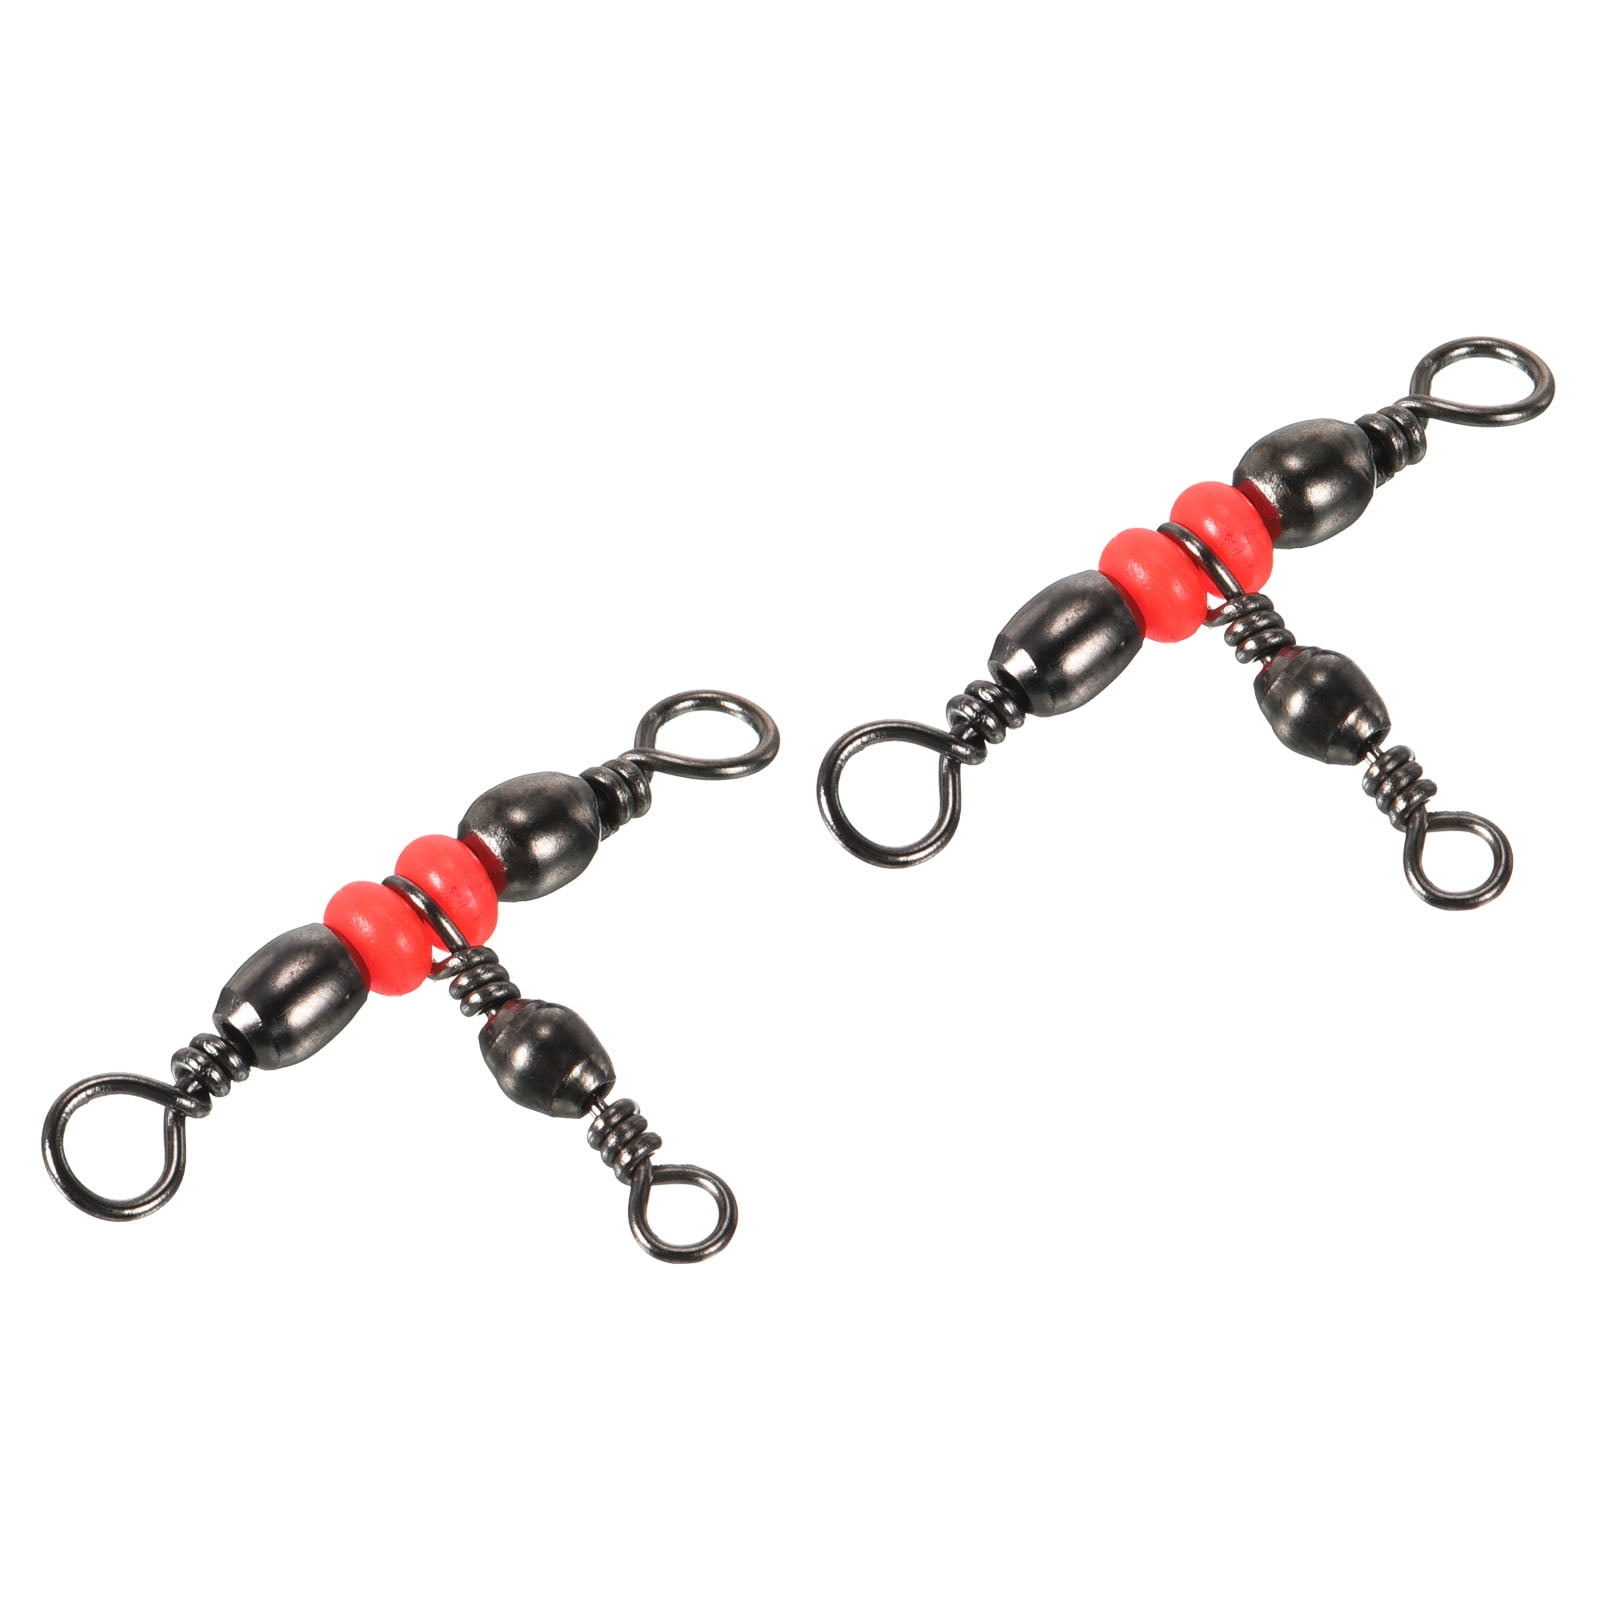 3 Way Swivel, 99lb Stainless Steel T-Turn Barrel Terminal Tackle